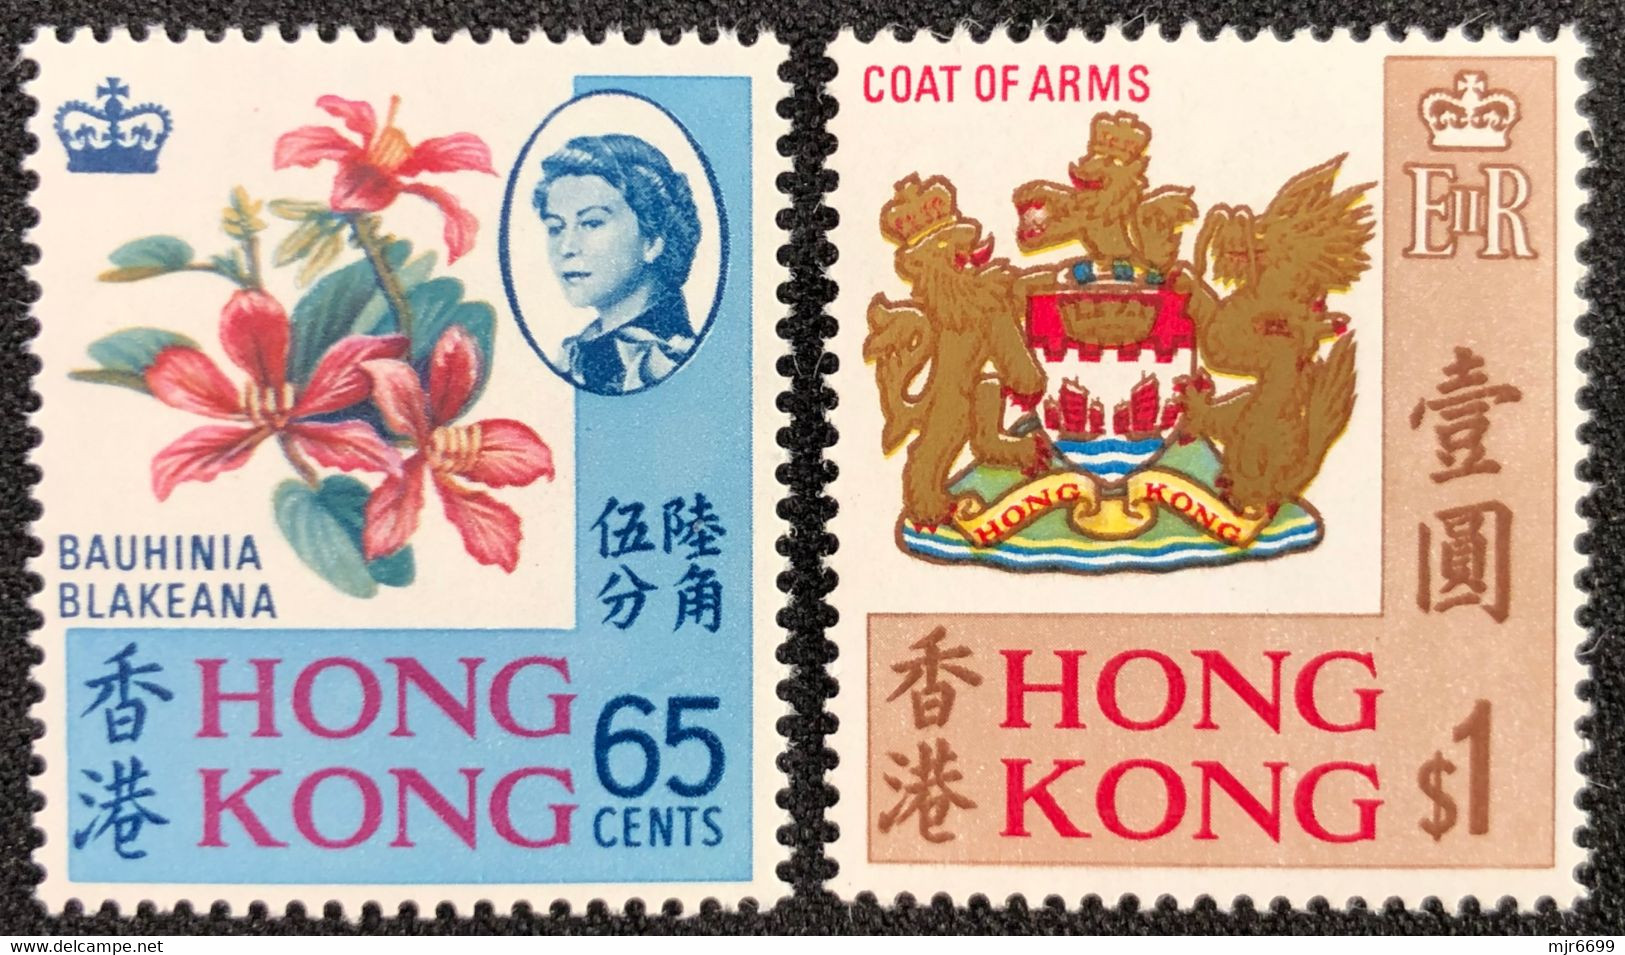 HONG KONG 1968 SET UM\MINT, NOT CHECKED FOR WATERMARK AND GUM - Nuevos